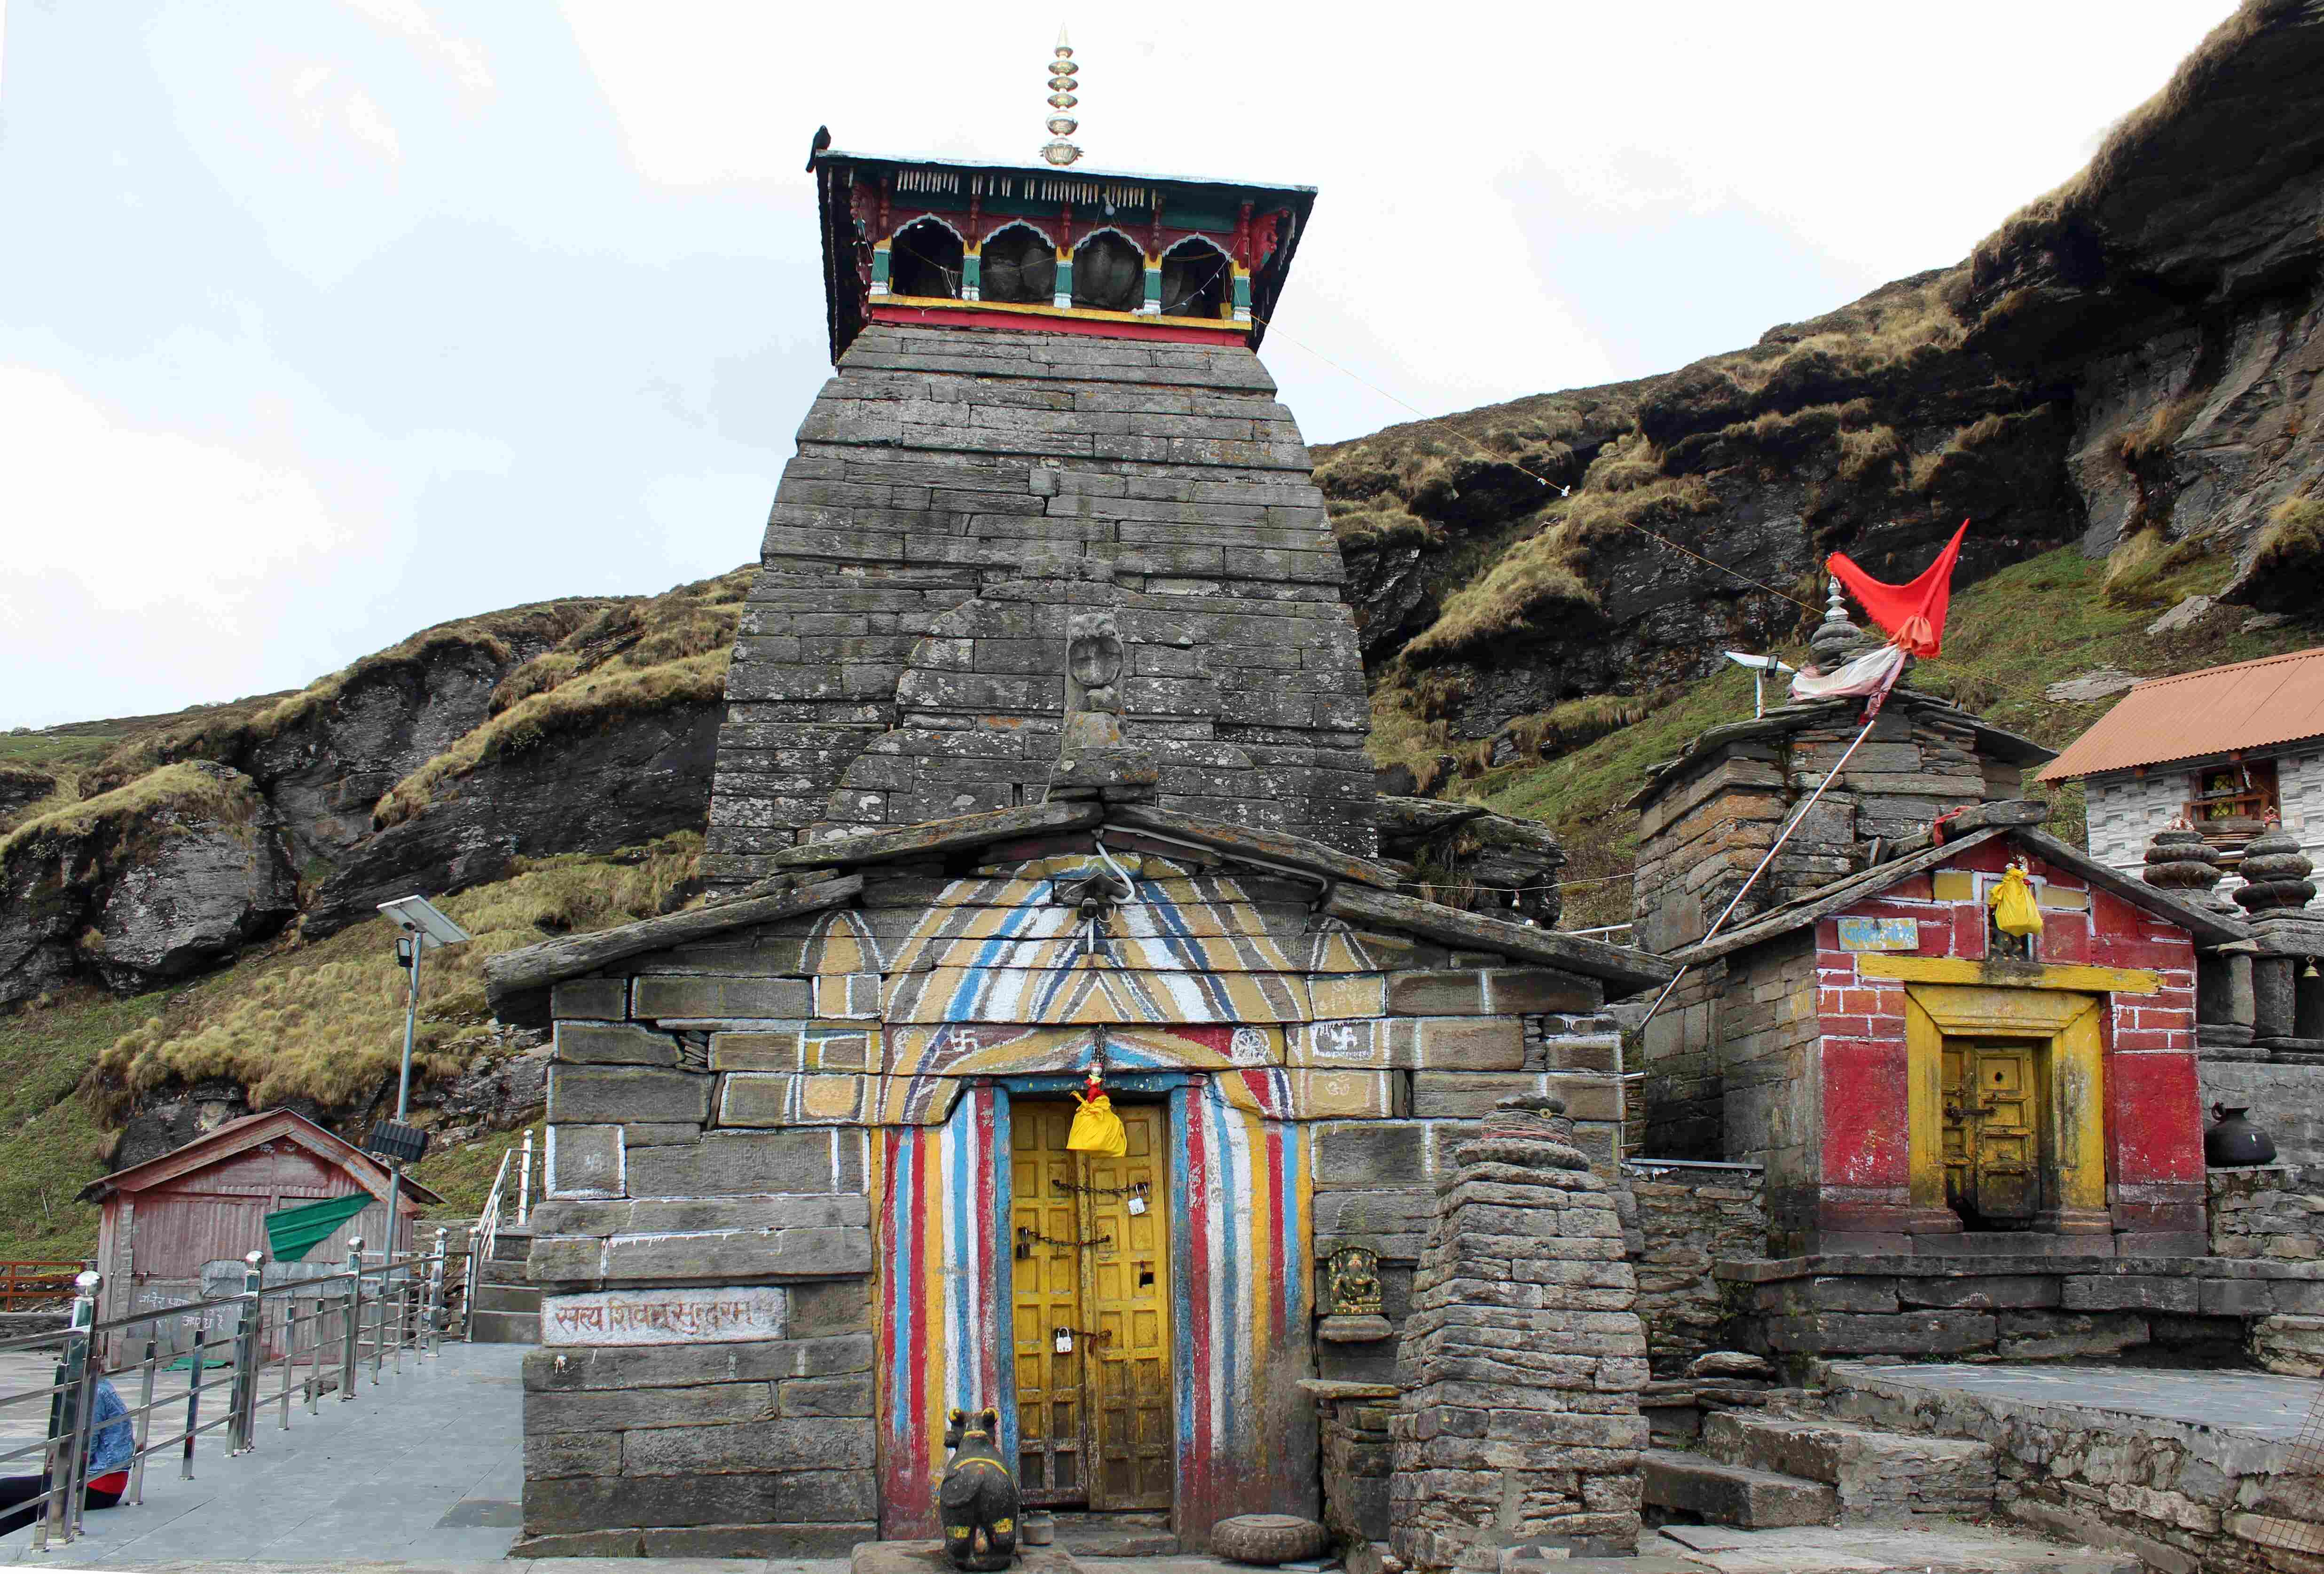 Panch Kedar Yatra: Embark on a 12-Day Spiritual Journey to the Five Sacred Shrines of Lord Shiva in 